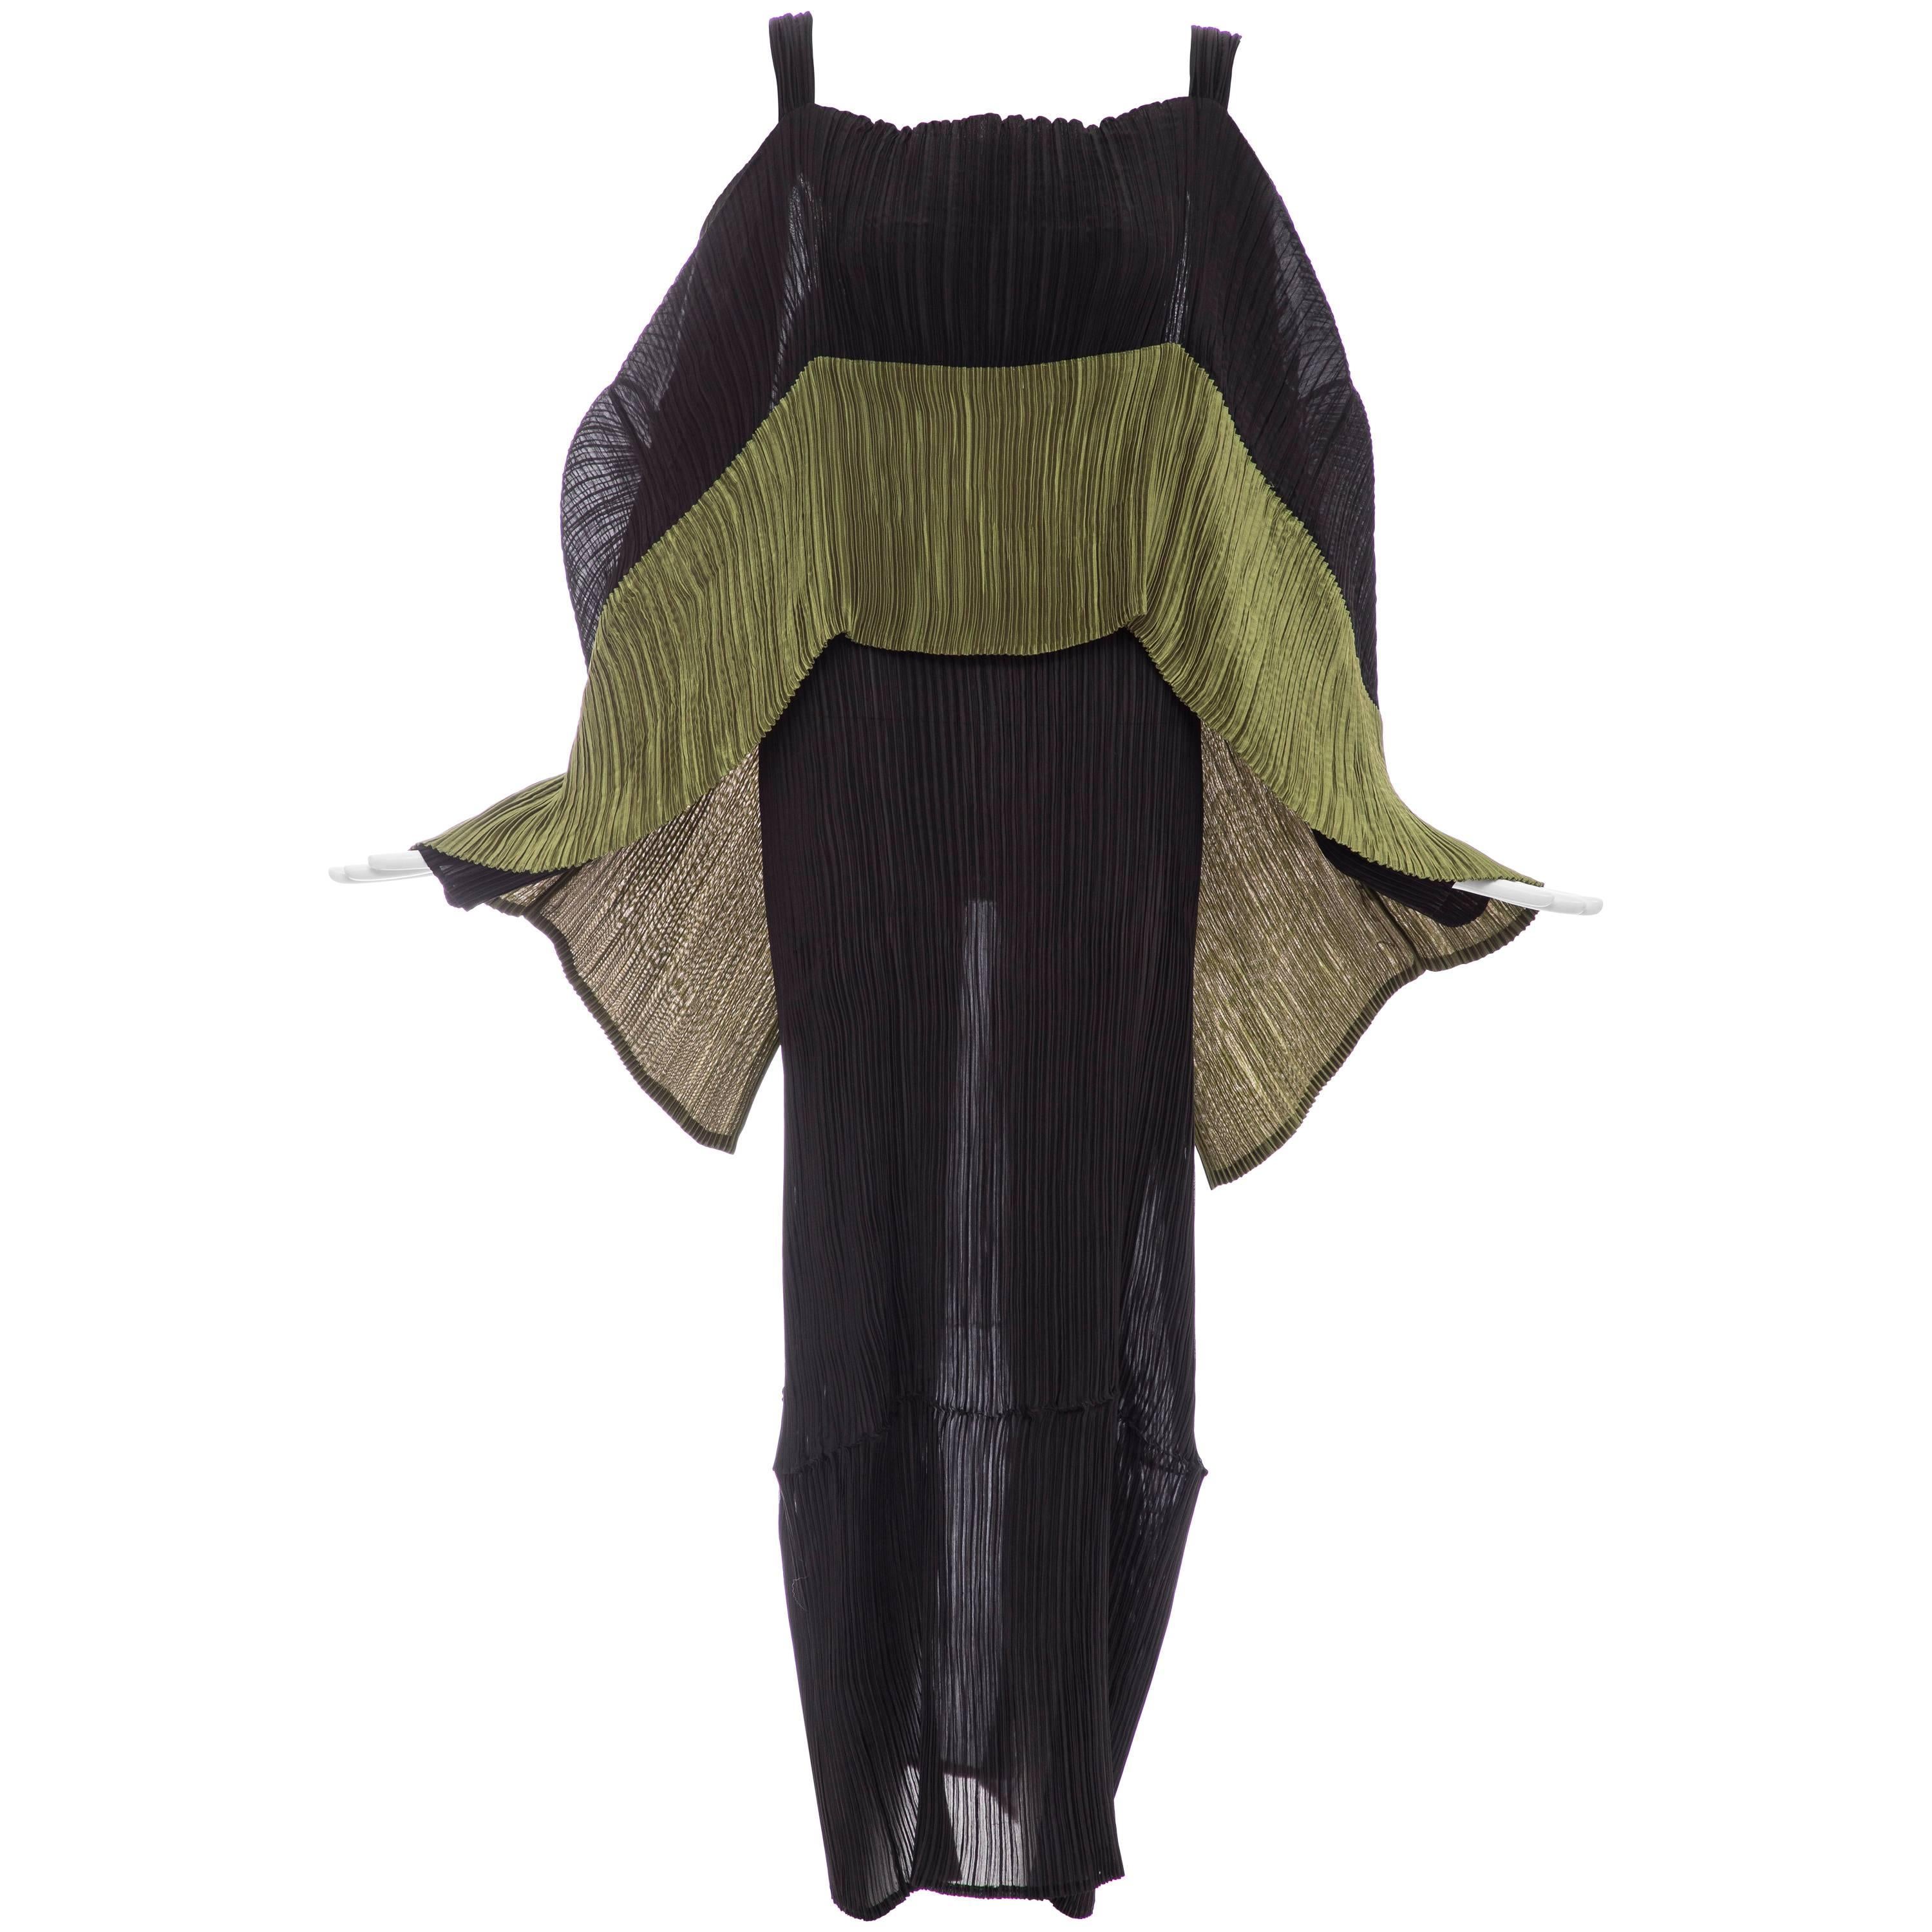 Issey Miyake Black Pleated Dress With Olive Green Panel At Bodice, Circa 1990s